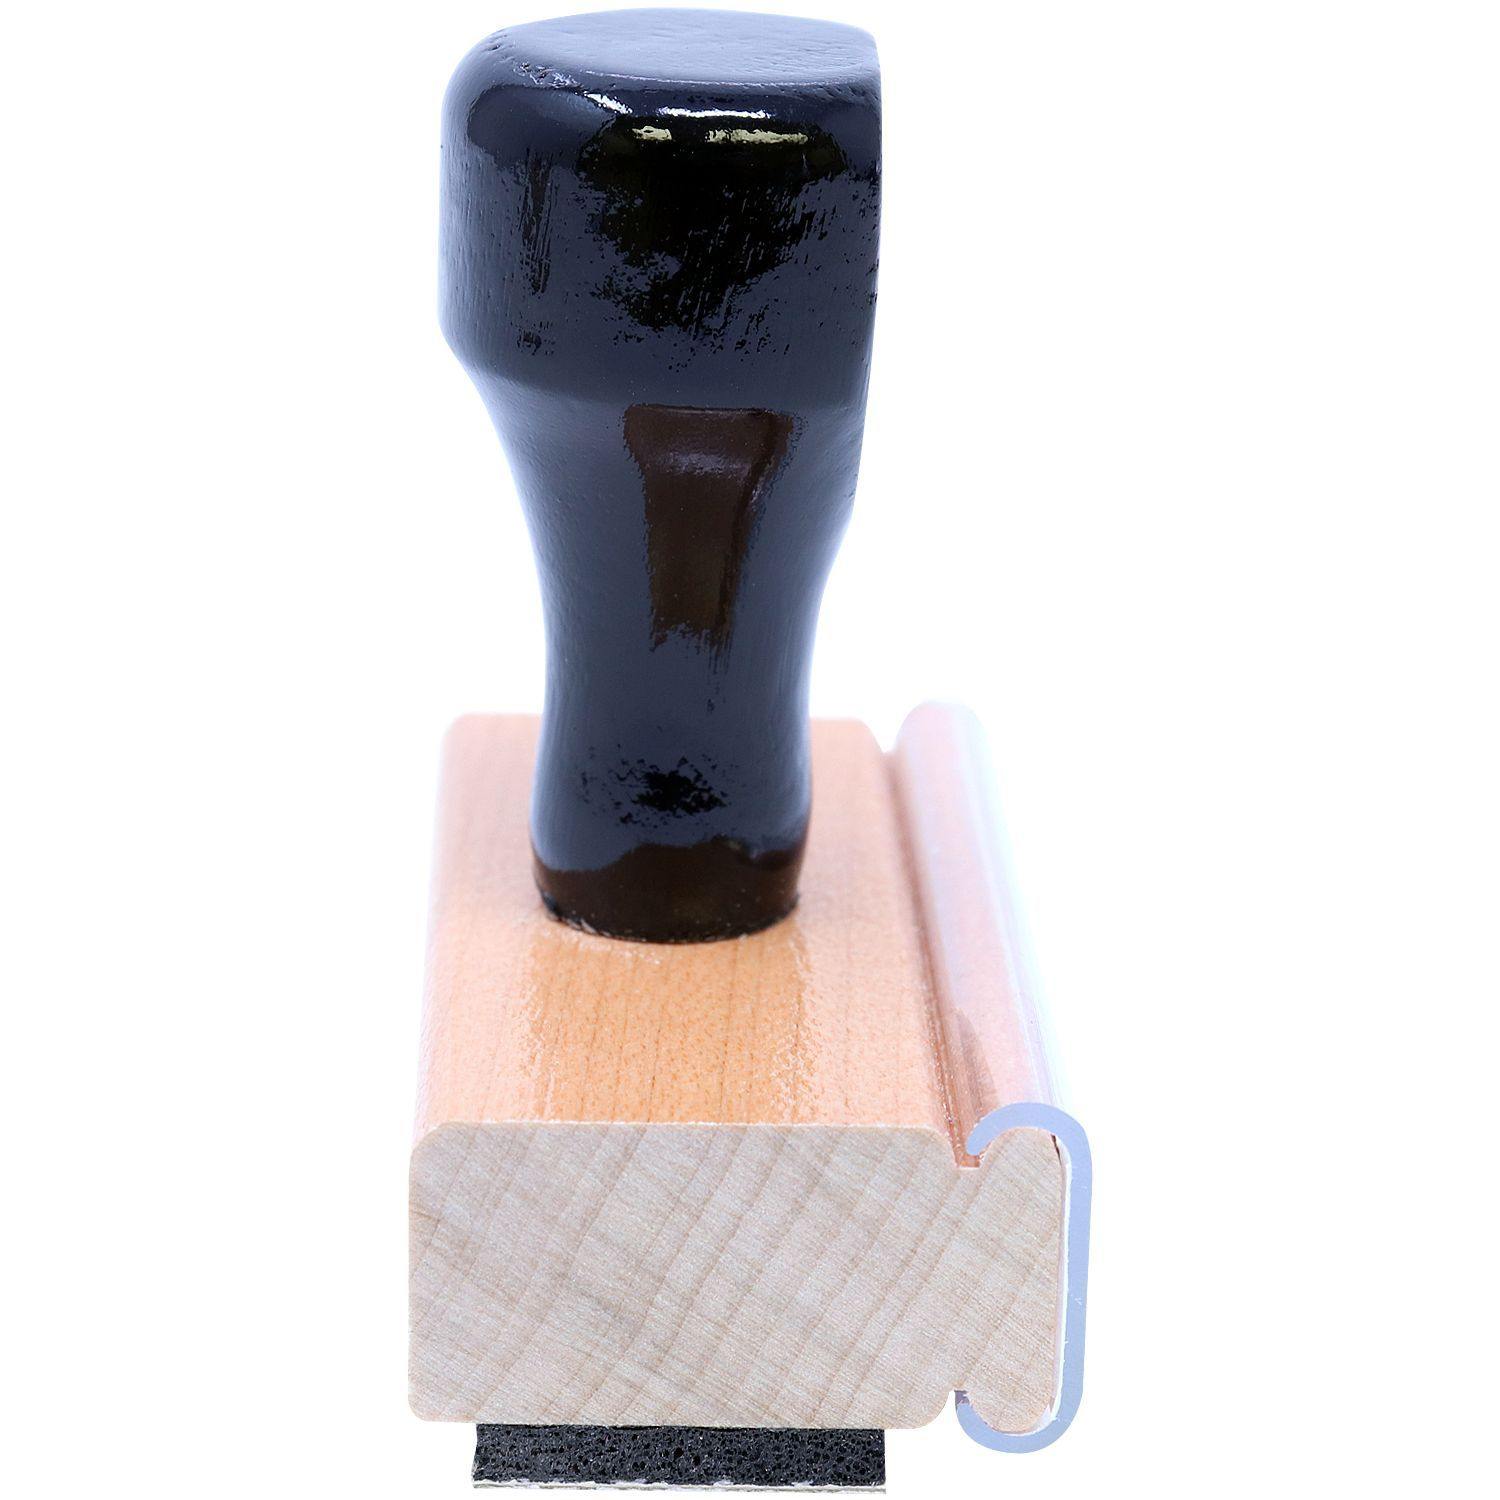 OCR Rubber Stamp - Engineer Seal Stamps - Brand_Acorn, Impression Size_Small, Stamp Type_Regular Stamp, Type of Use_Office, Type of Use_Professional